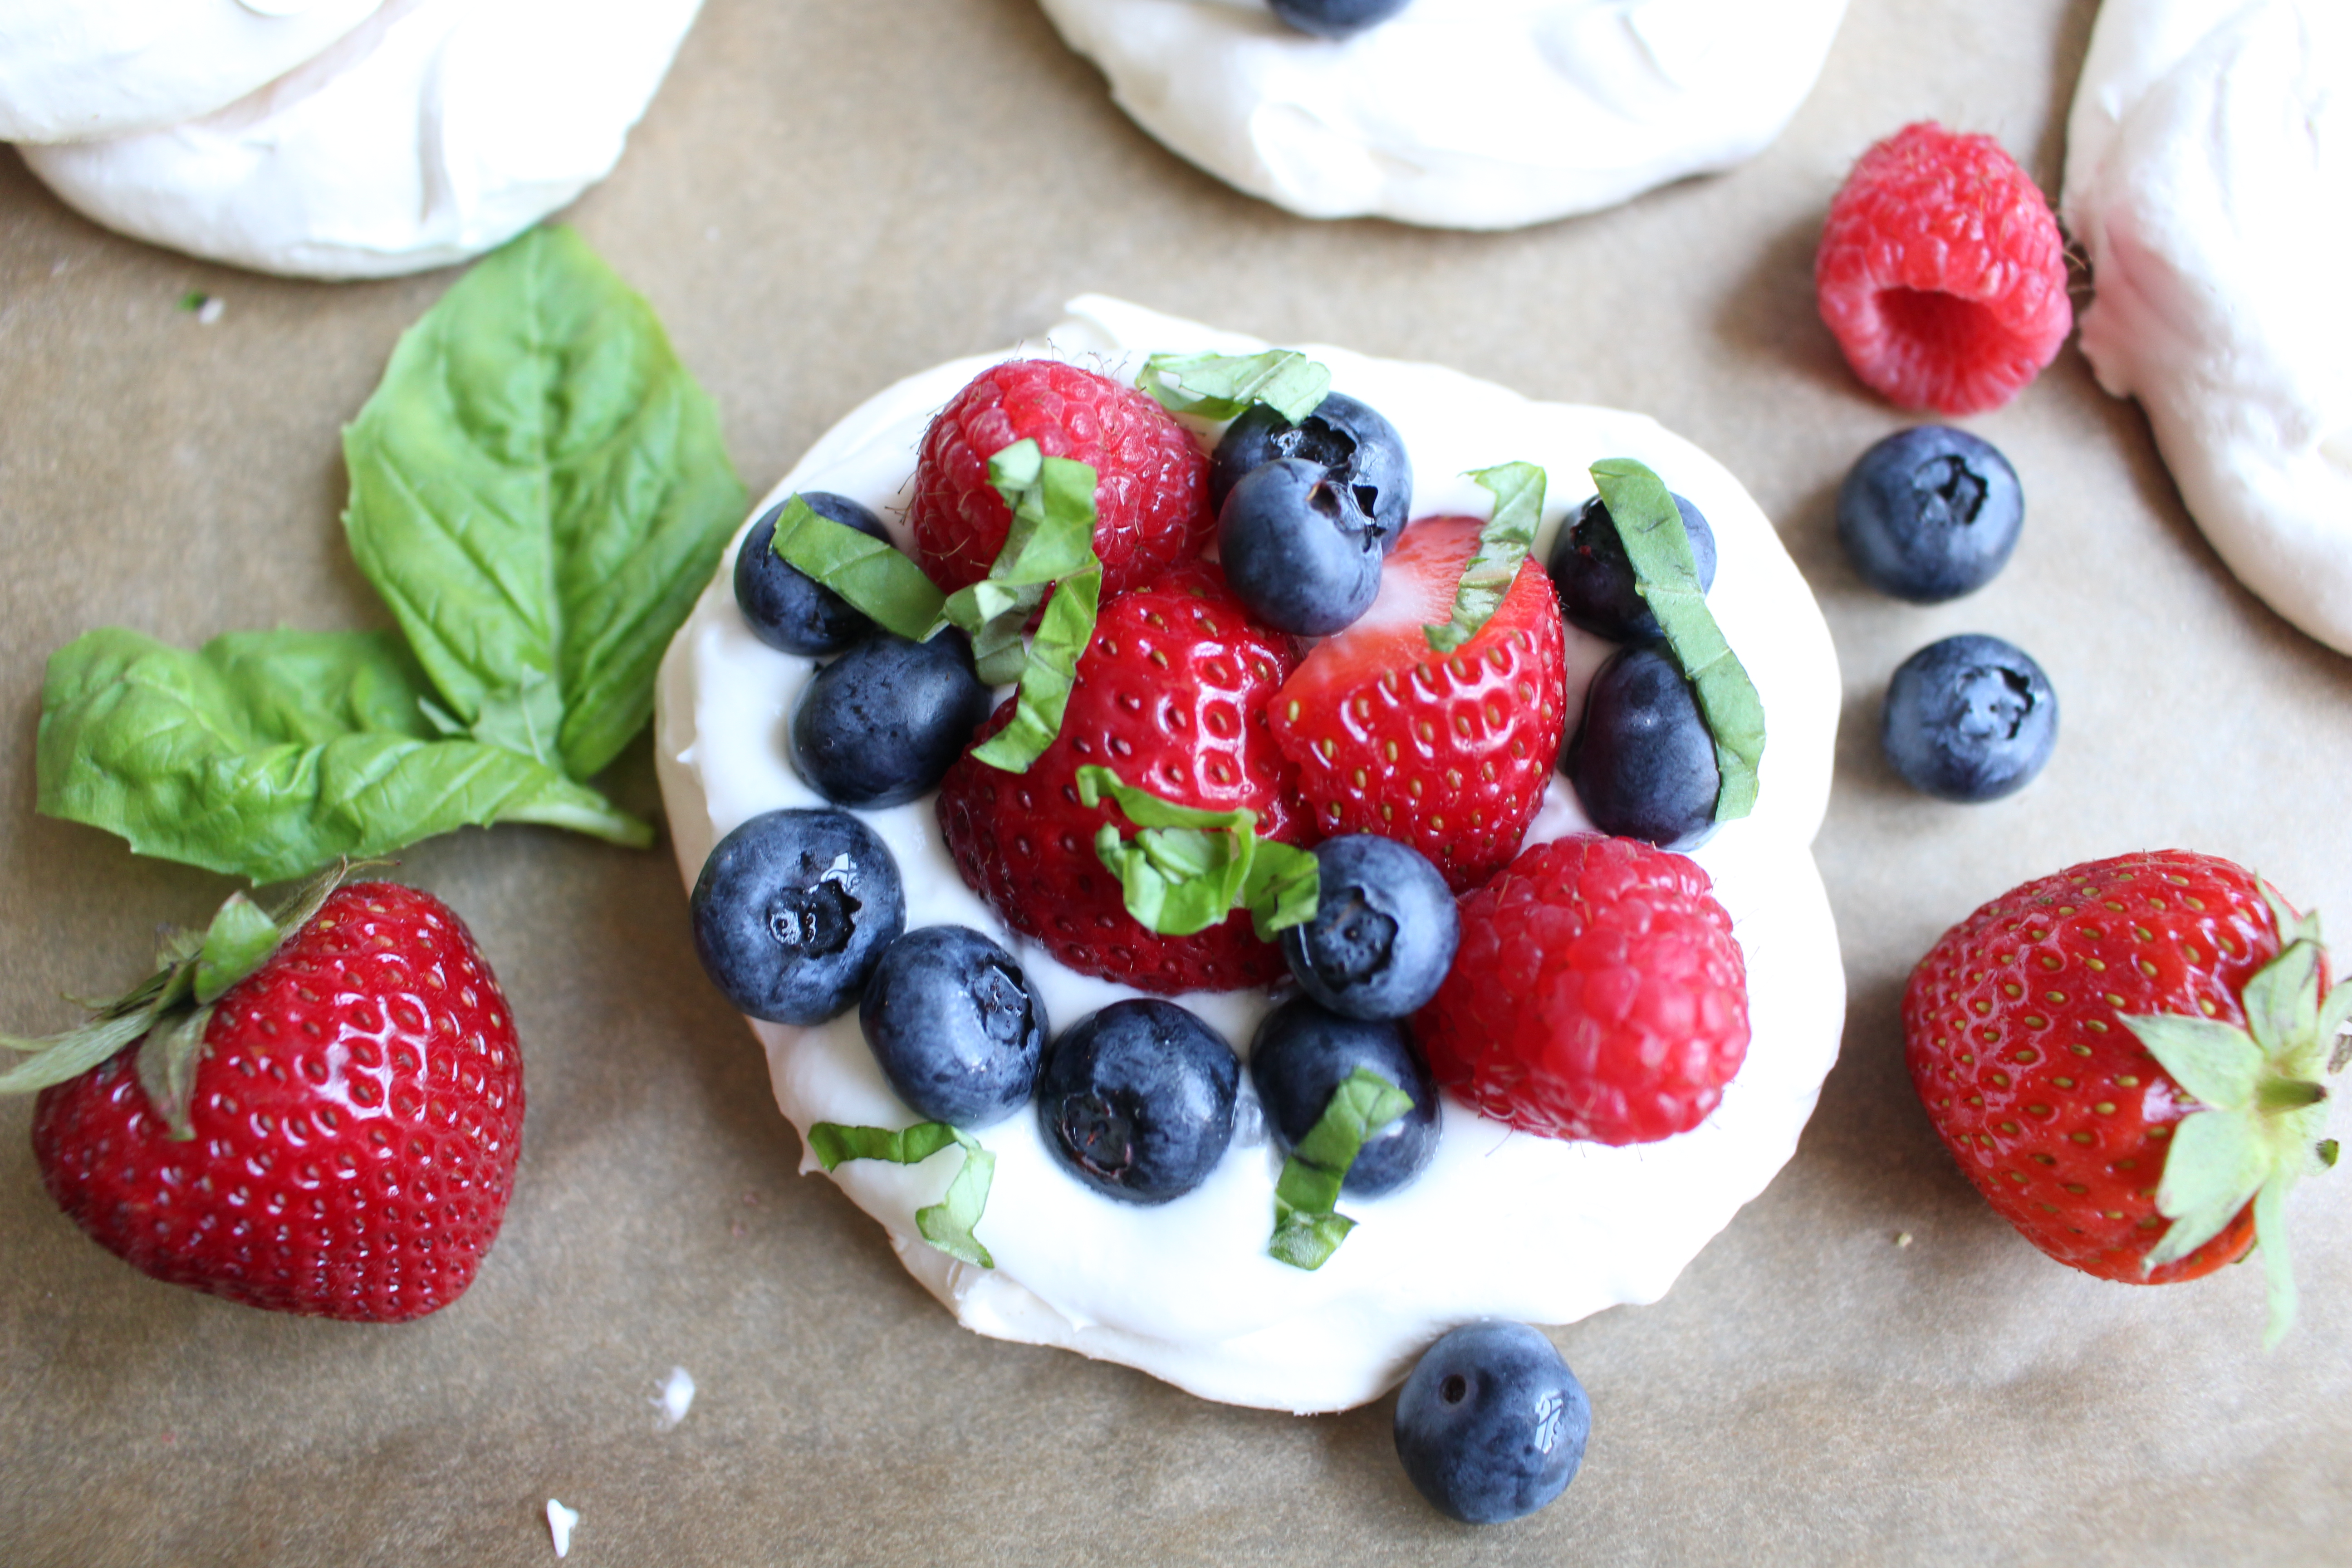 These meringues, topped with coconut whipped cream, fresh berries, and chopped basil, are the perfect summer dessert - light, airy, and fresh!